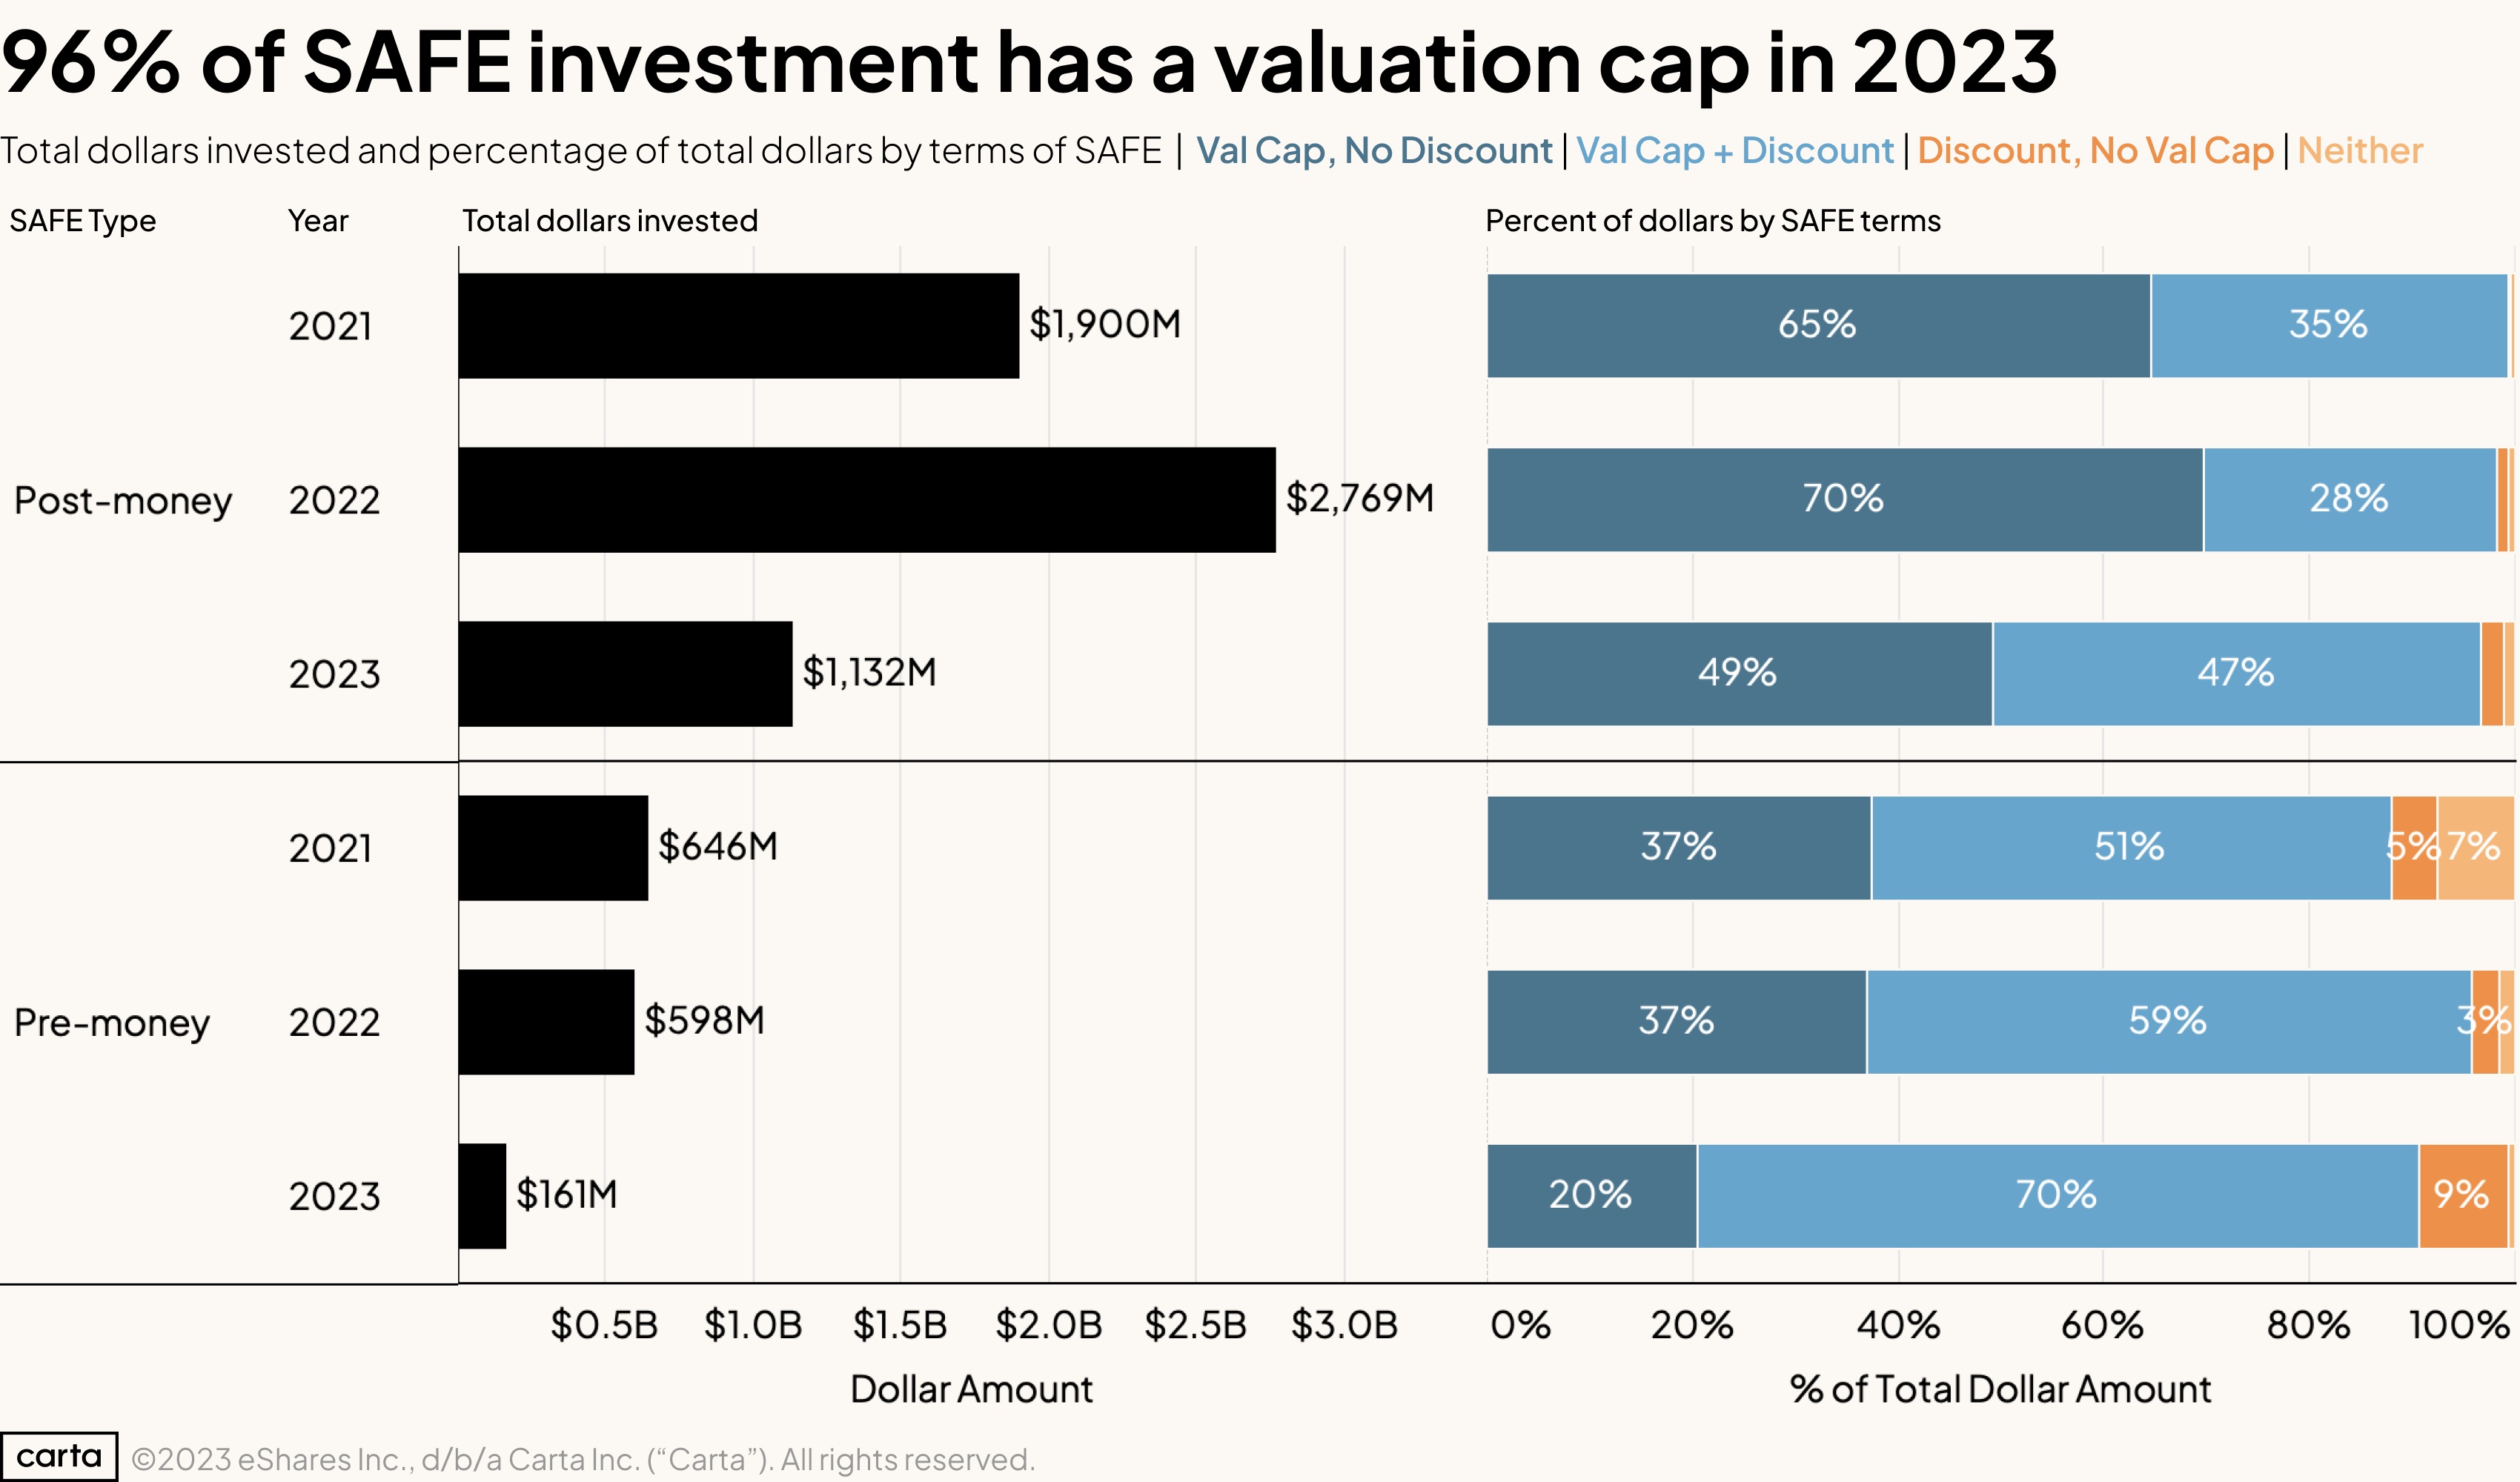 The art of pre seed valuation - FasterCapital